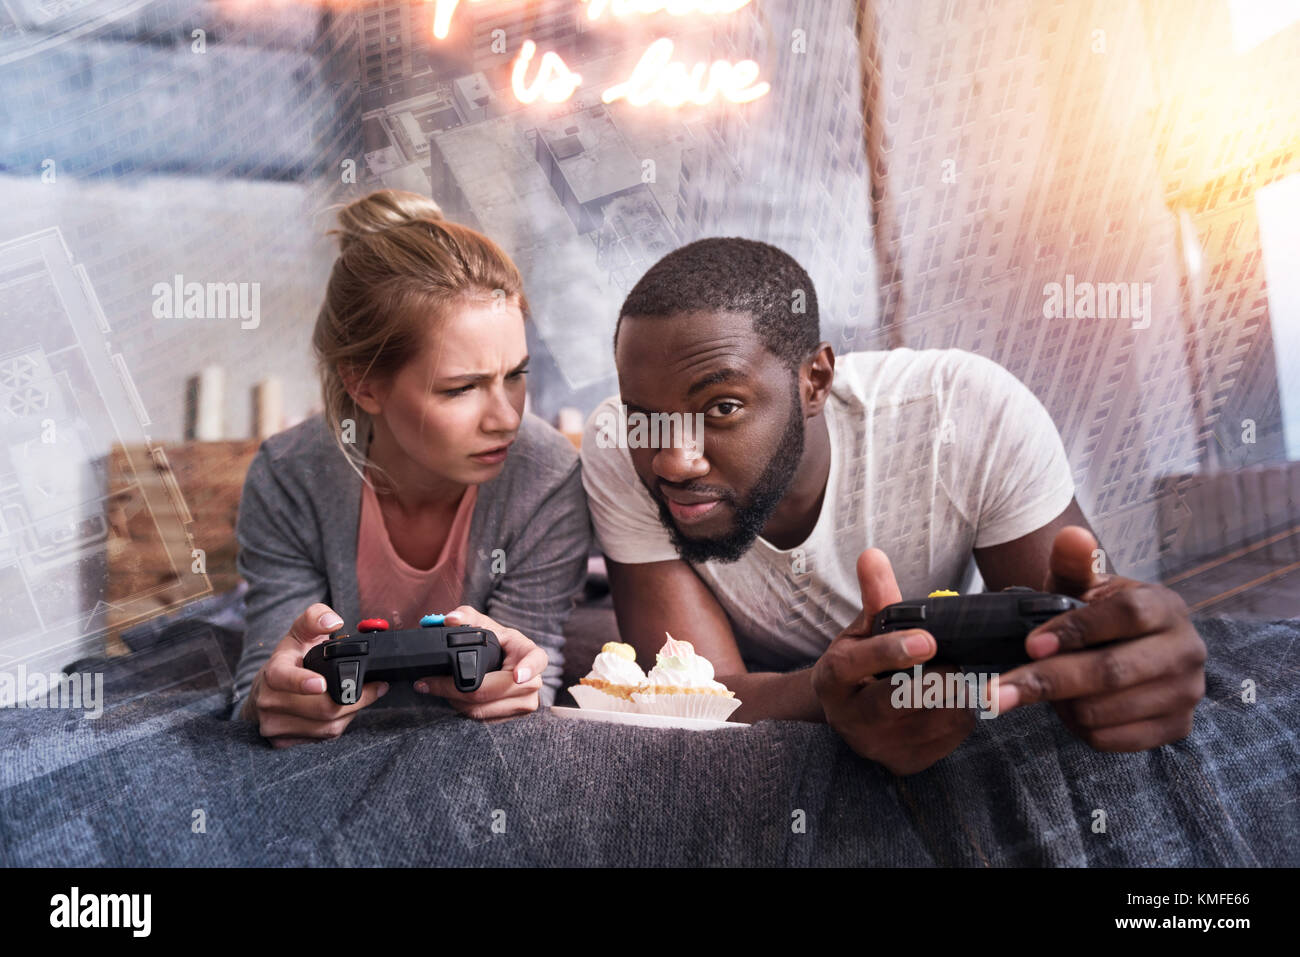 Pleasant handsome man playing with his girlfriend Stock Photo